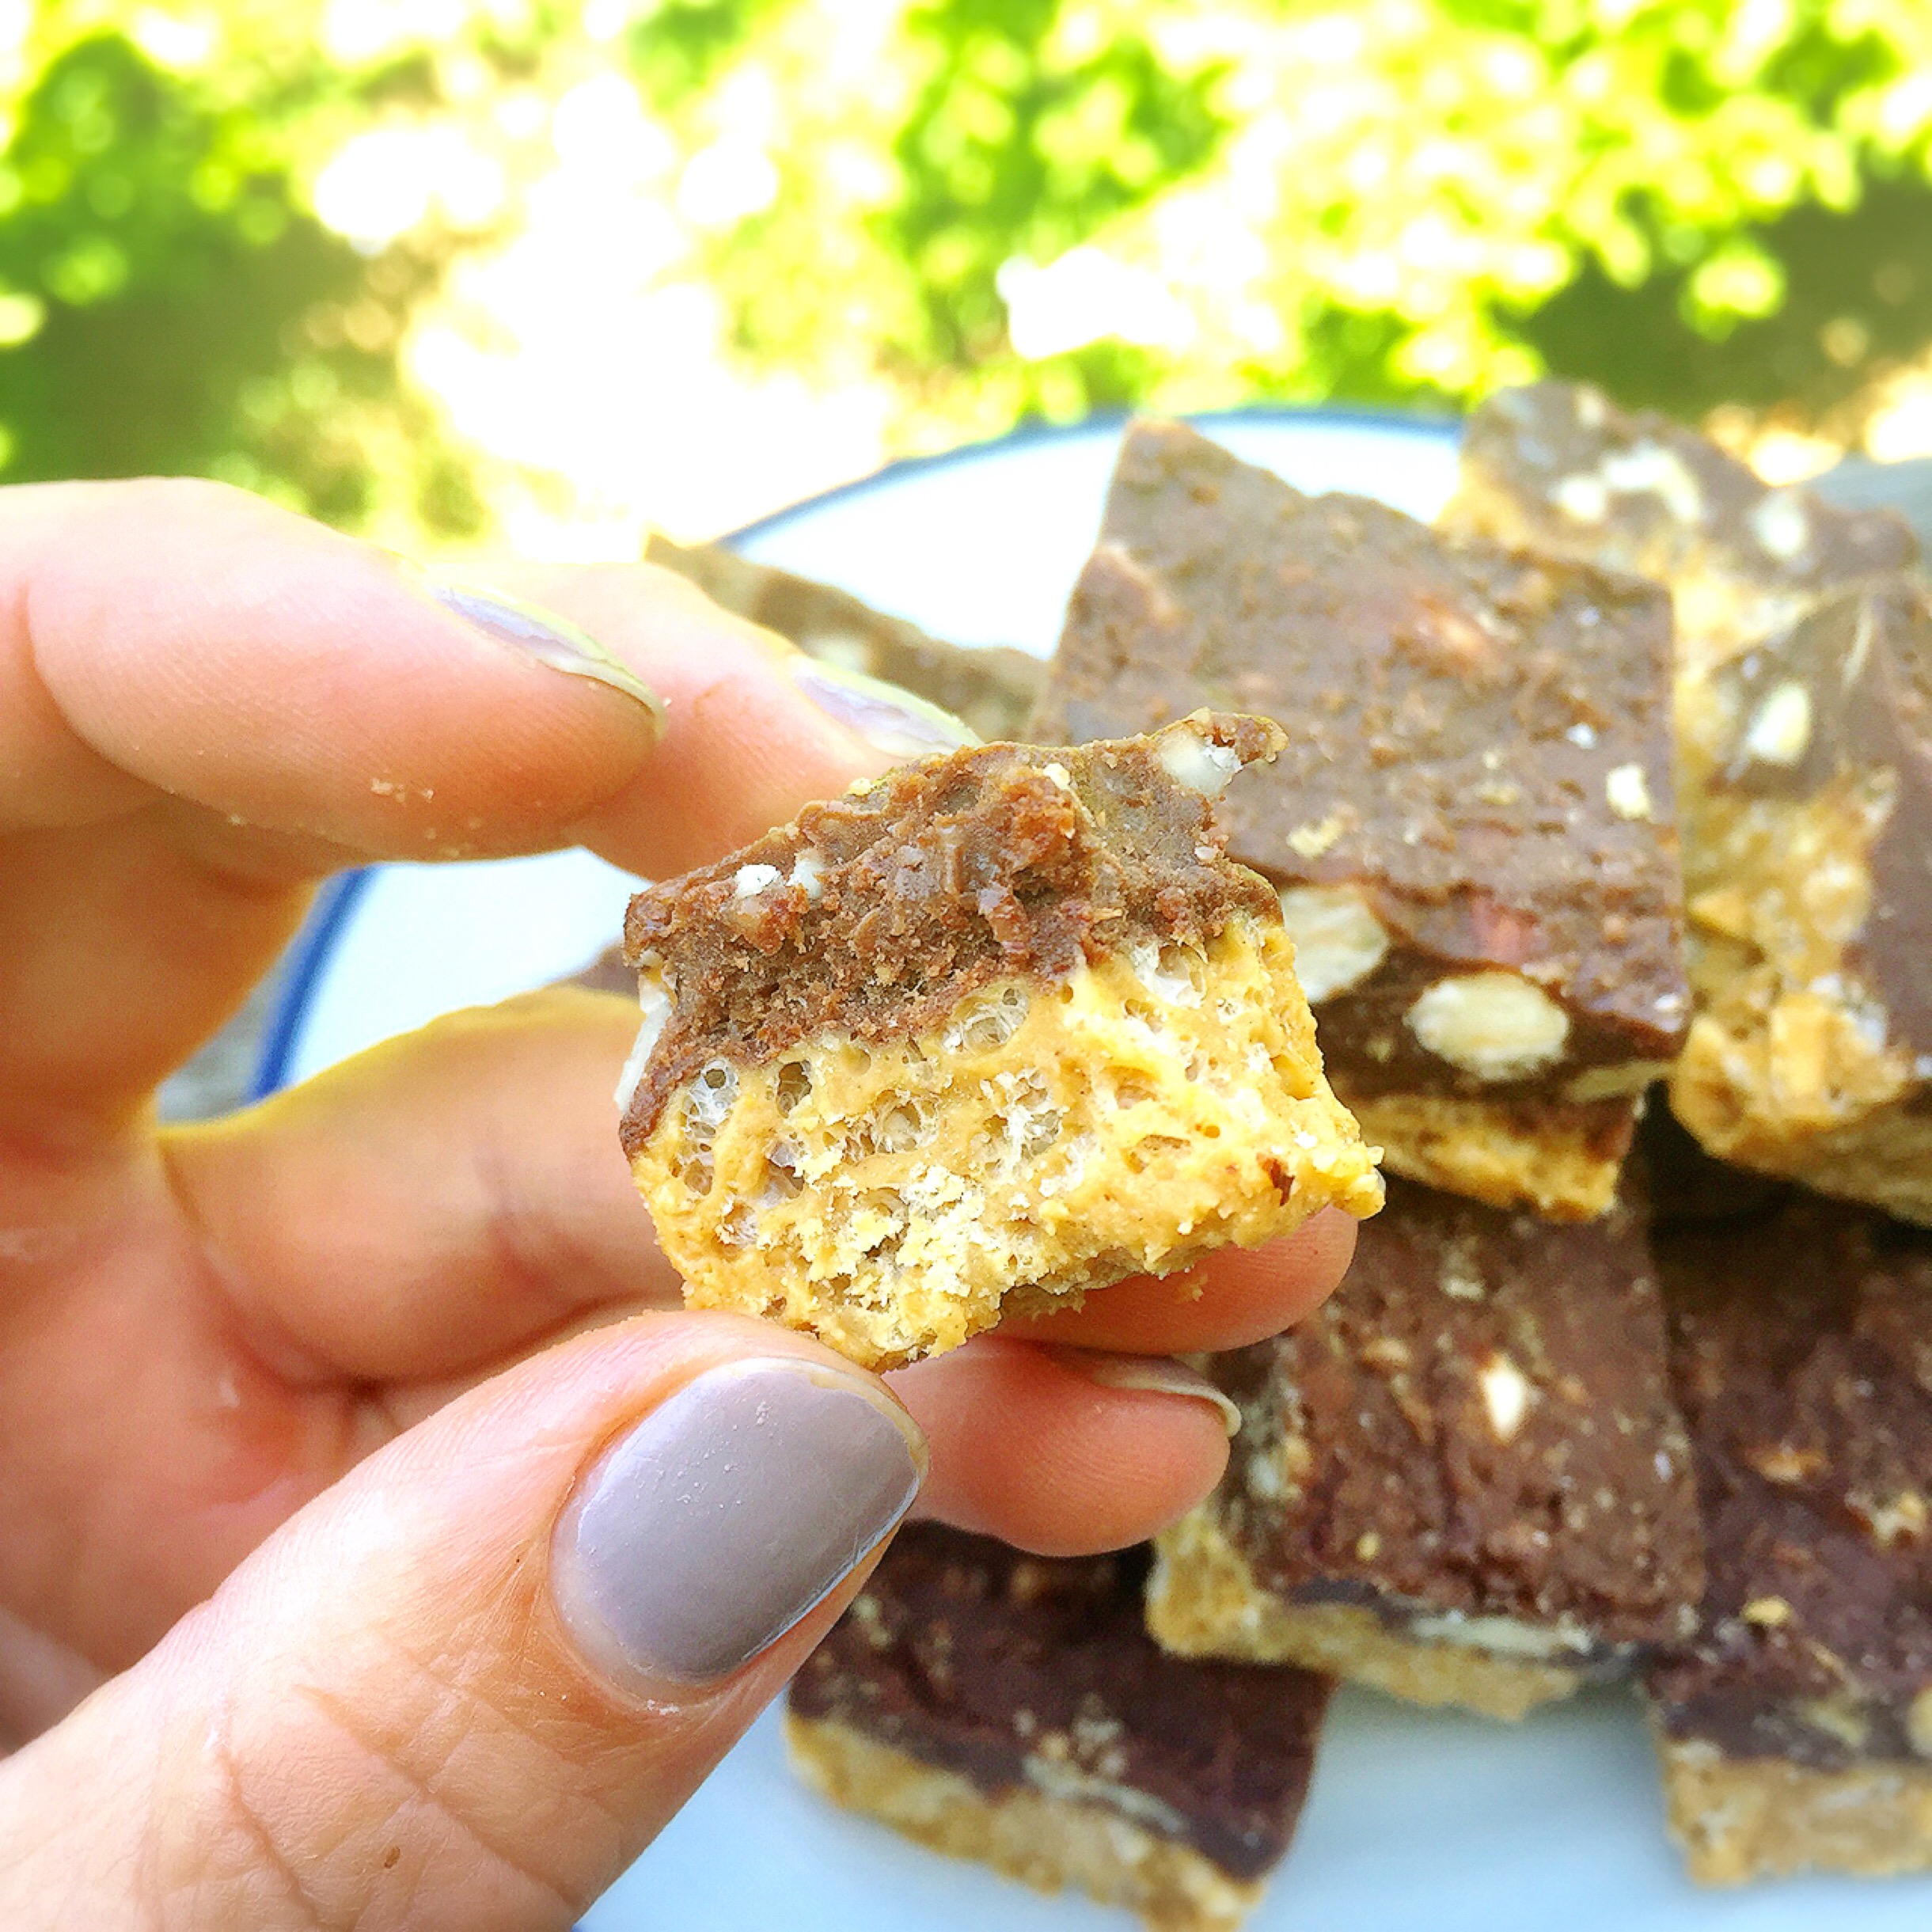 Raw, vegan, and delicious... you have to try these chocolate-peanut butter bars!